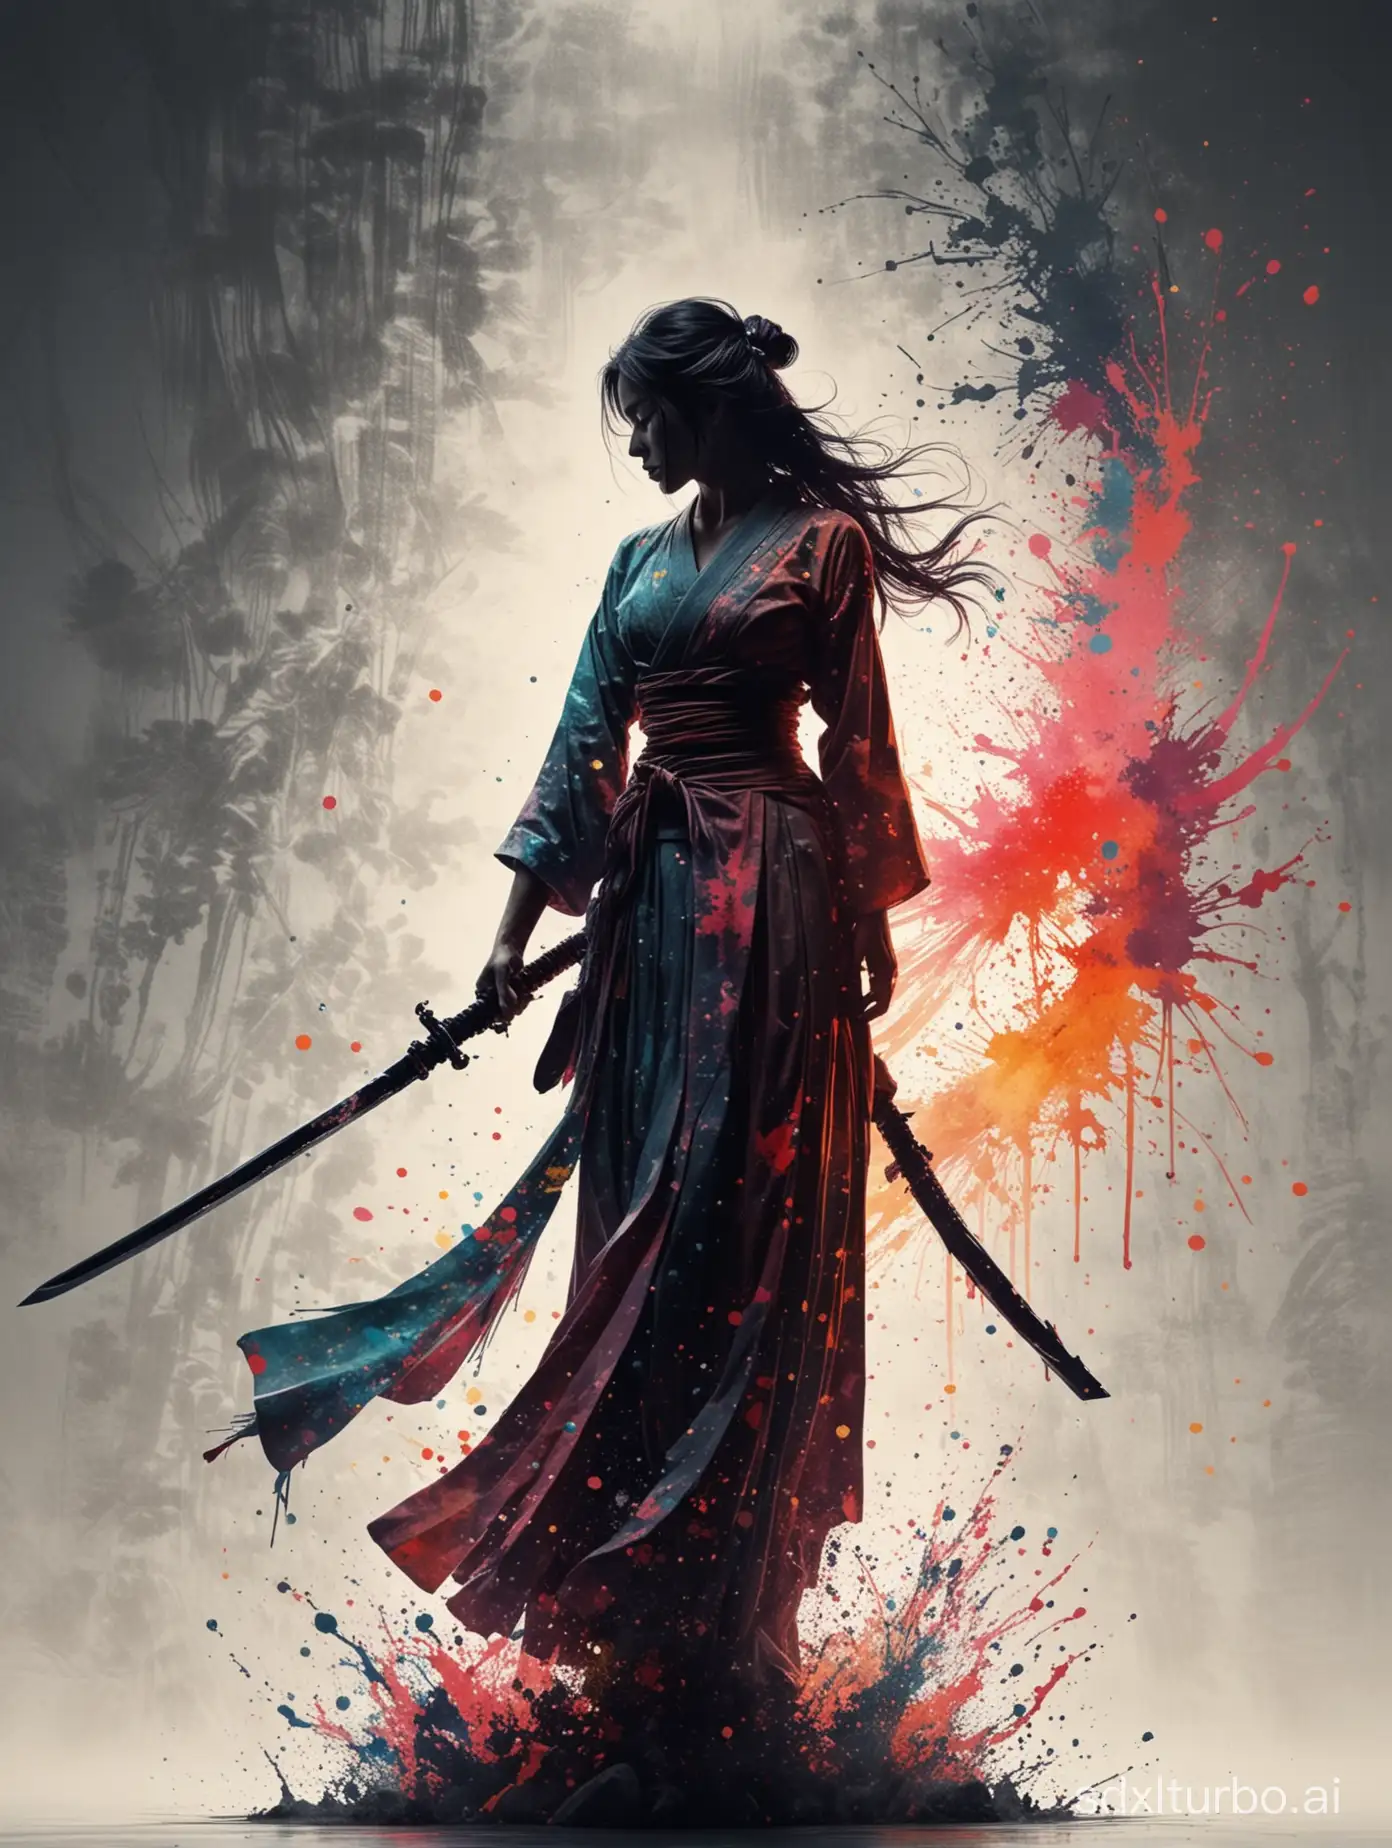 Aesthetic-Silhouette-of-a-SwordWielding-Woman-in-Ancient-Japanese-Art-Style